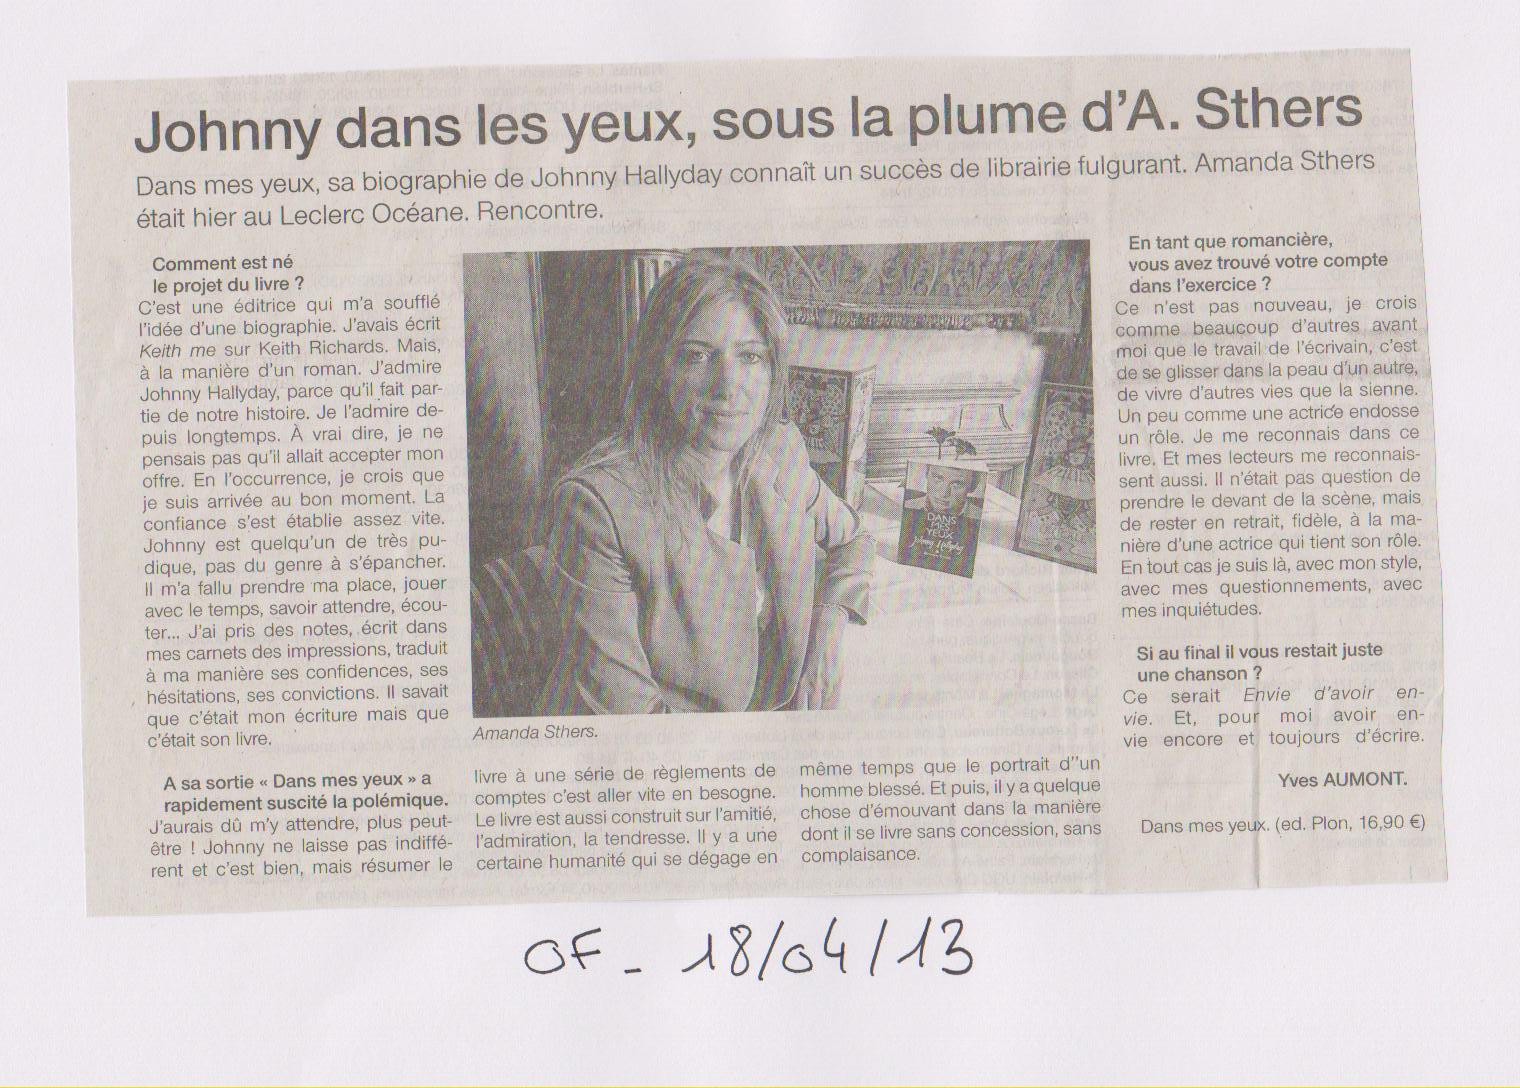 OUEST FRANCE - AMANDA STHERS - 18-04-13